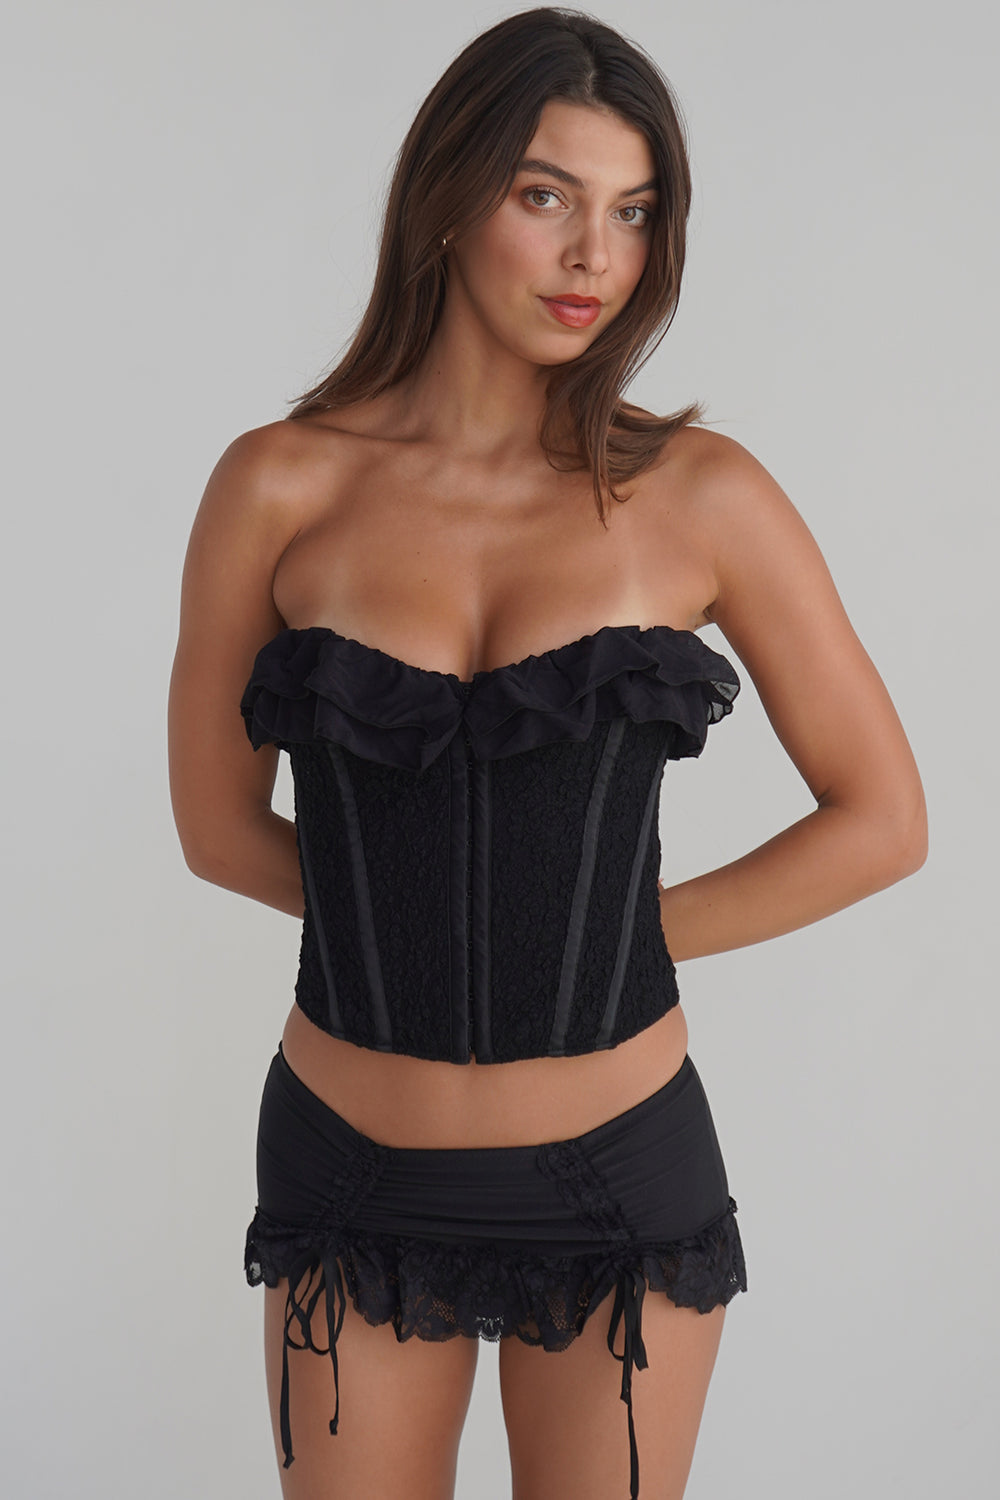 Women's Corsets  Corsets - We Are Hah – Page 2 – We Are HAH